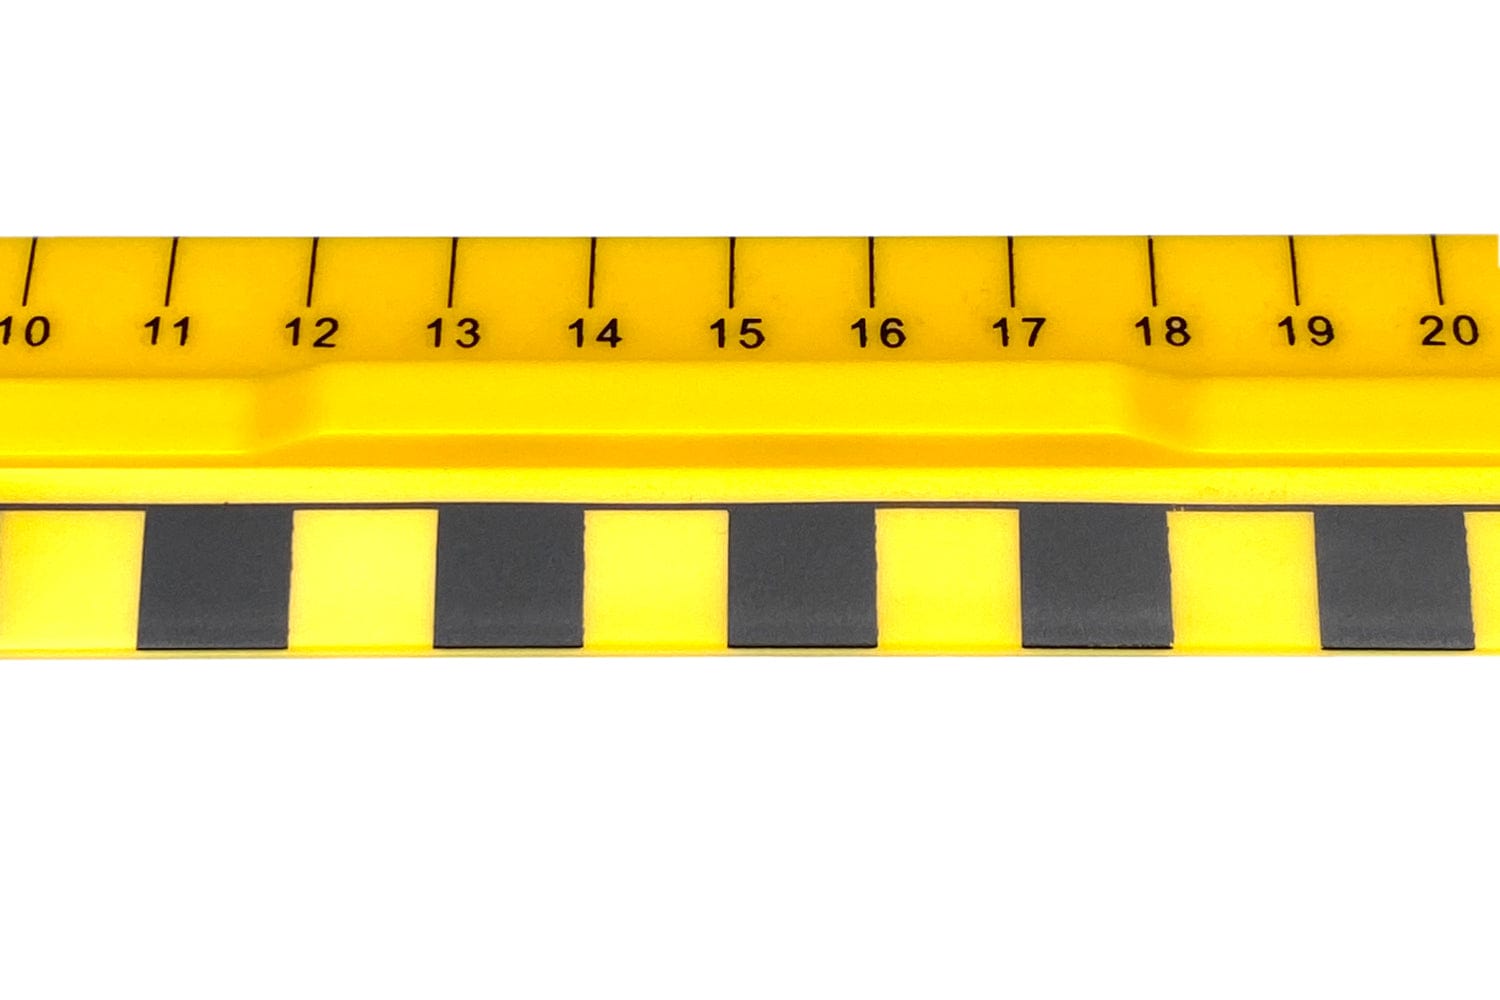 Create a Centering Ruler for Engraving